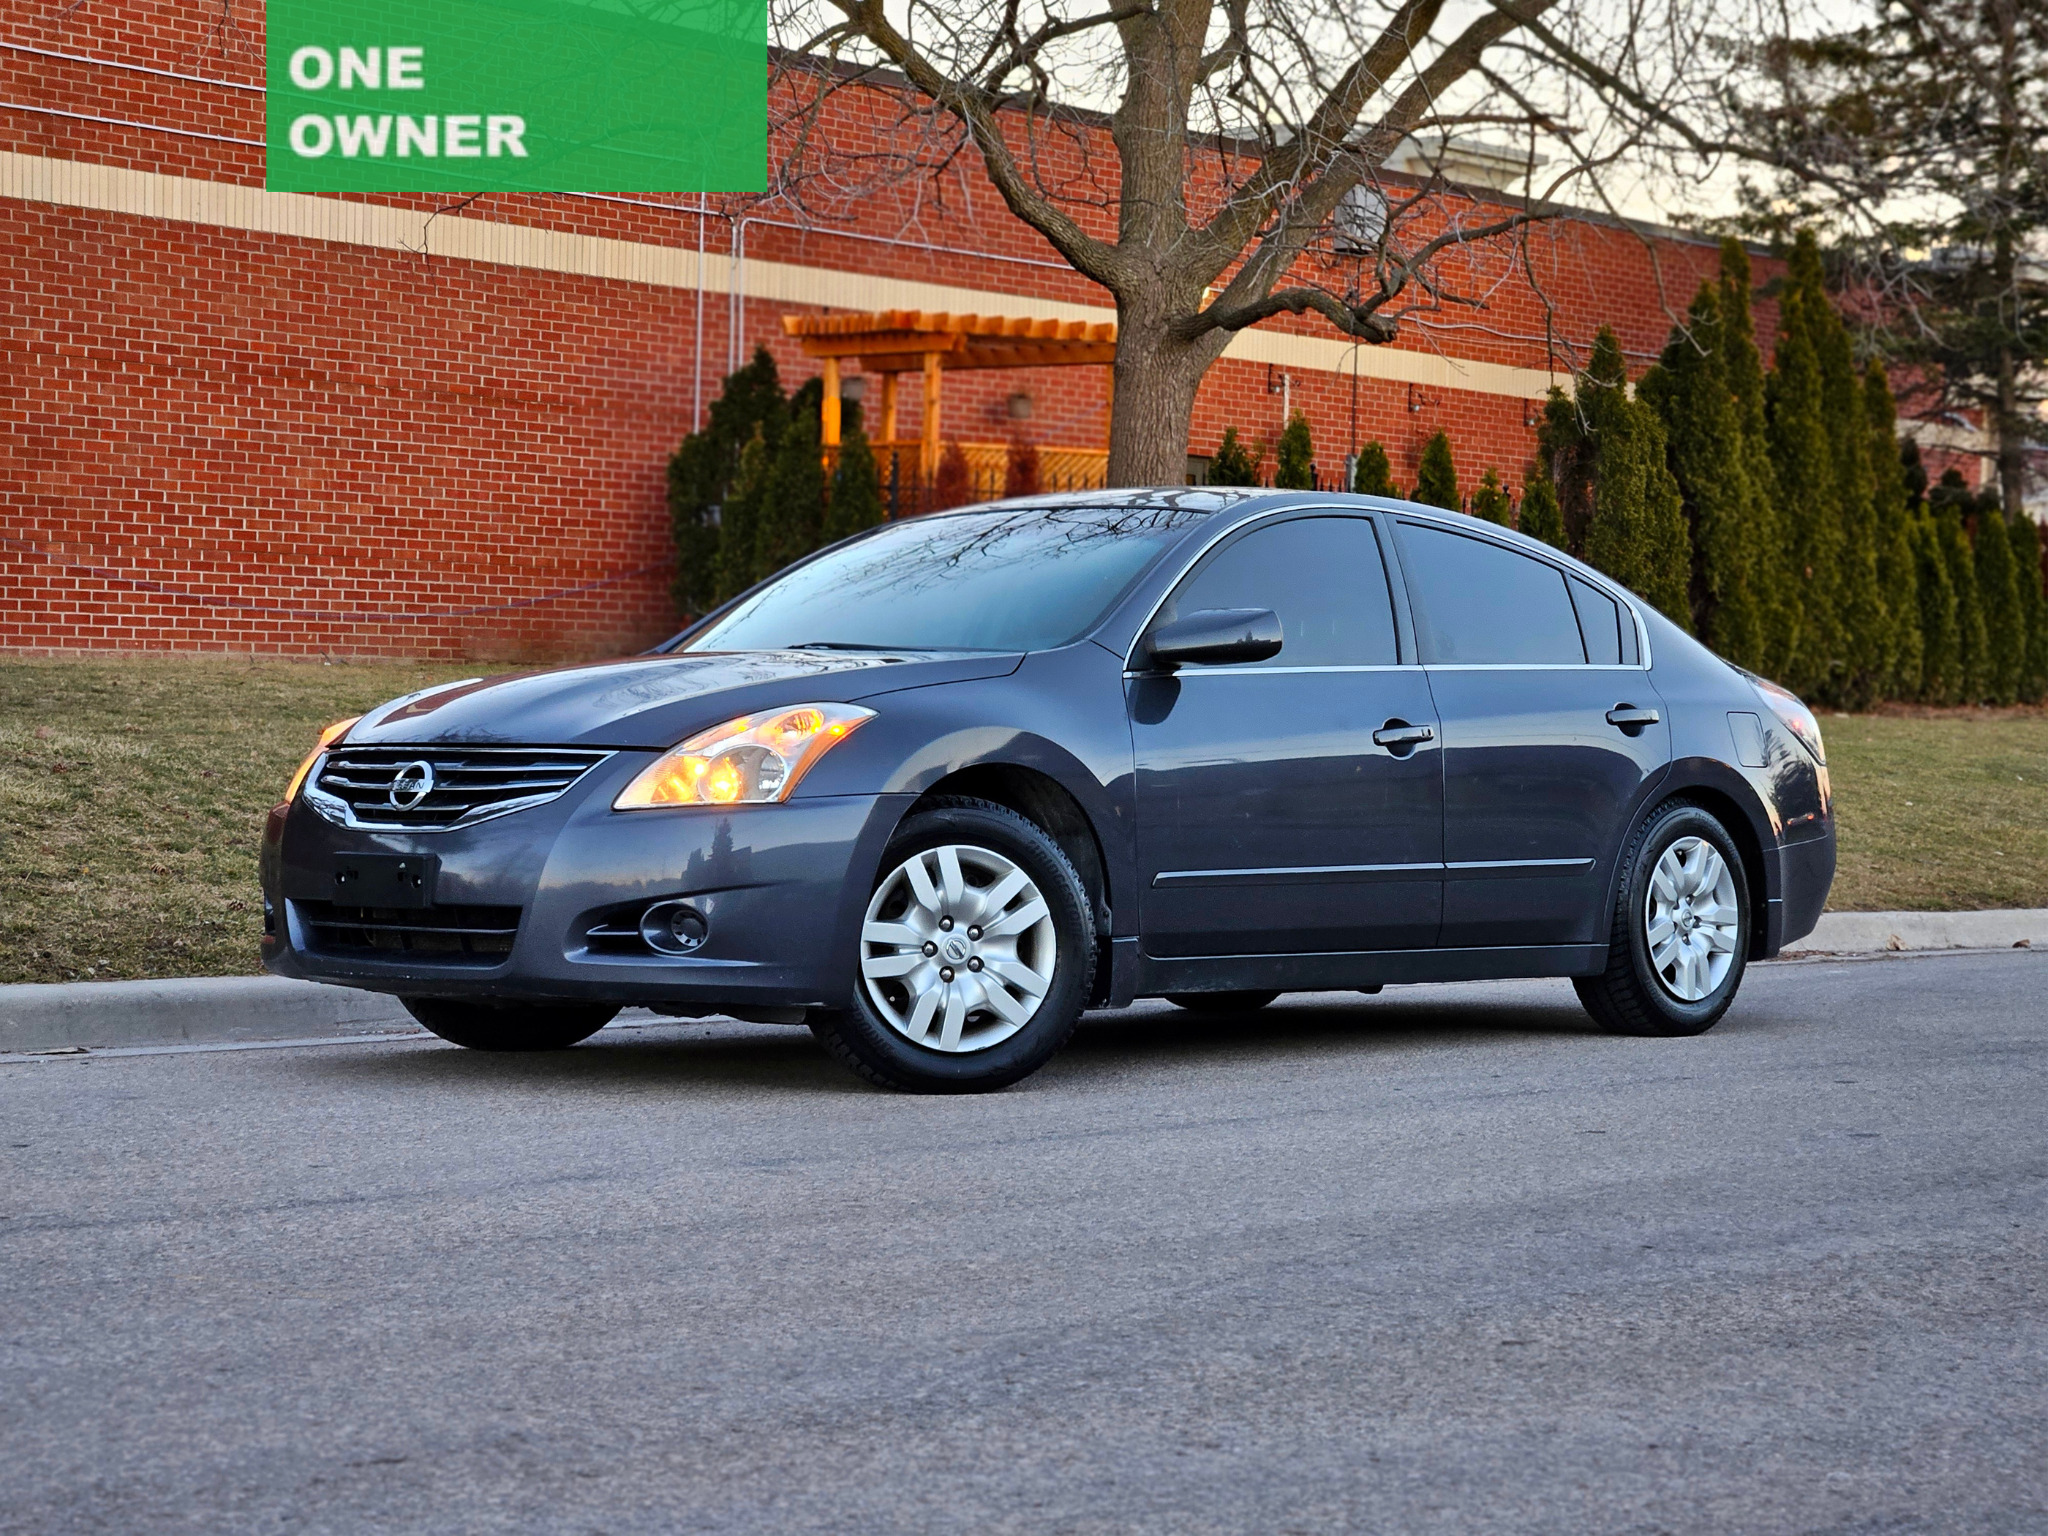 2012 Nissan Altima 2.5L 4-Cylinder ** ONE Owner**  **ONLY 100,000KM**